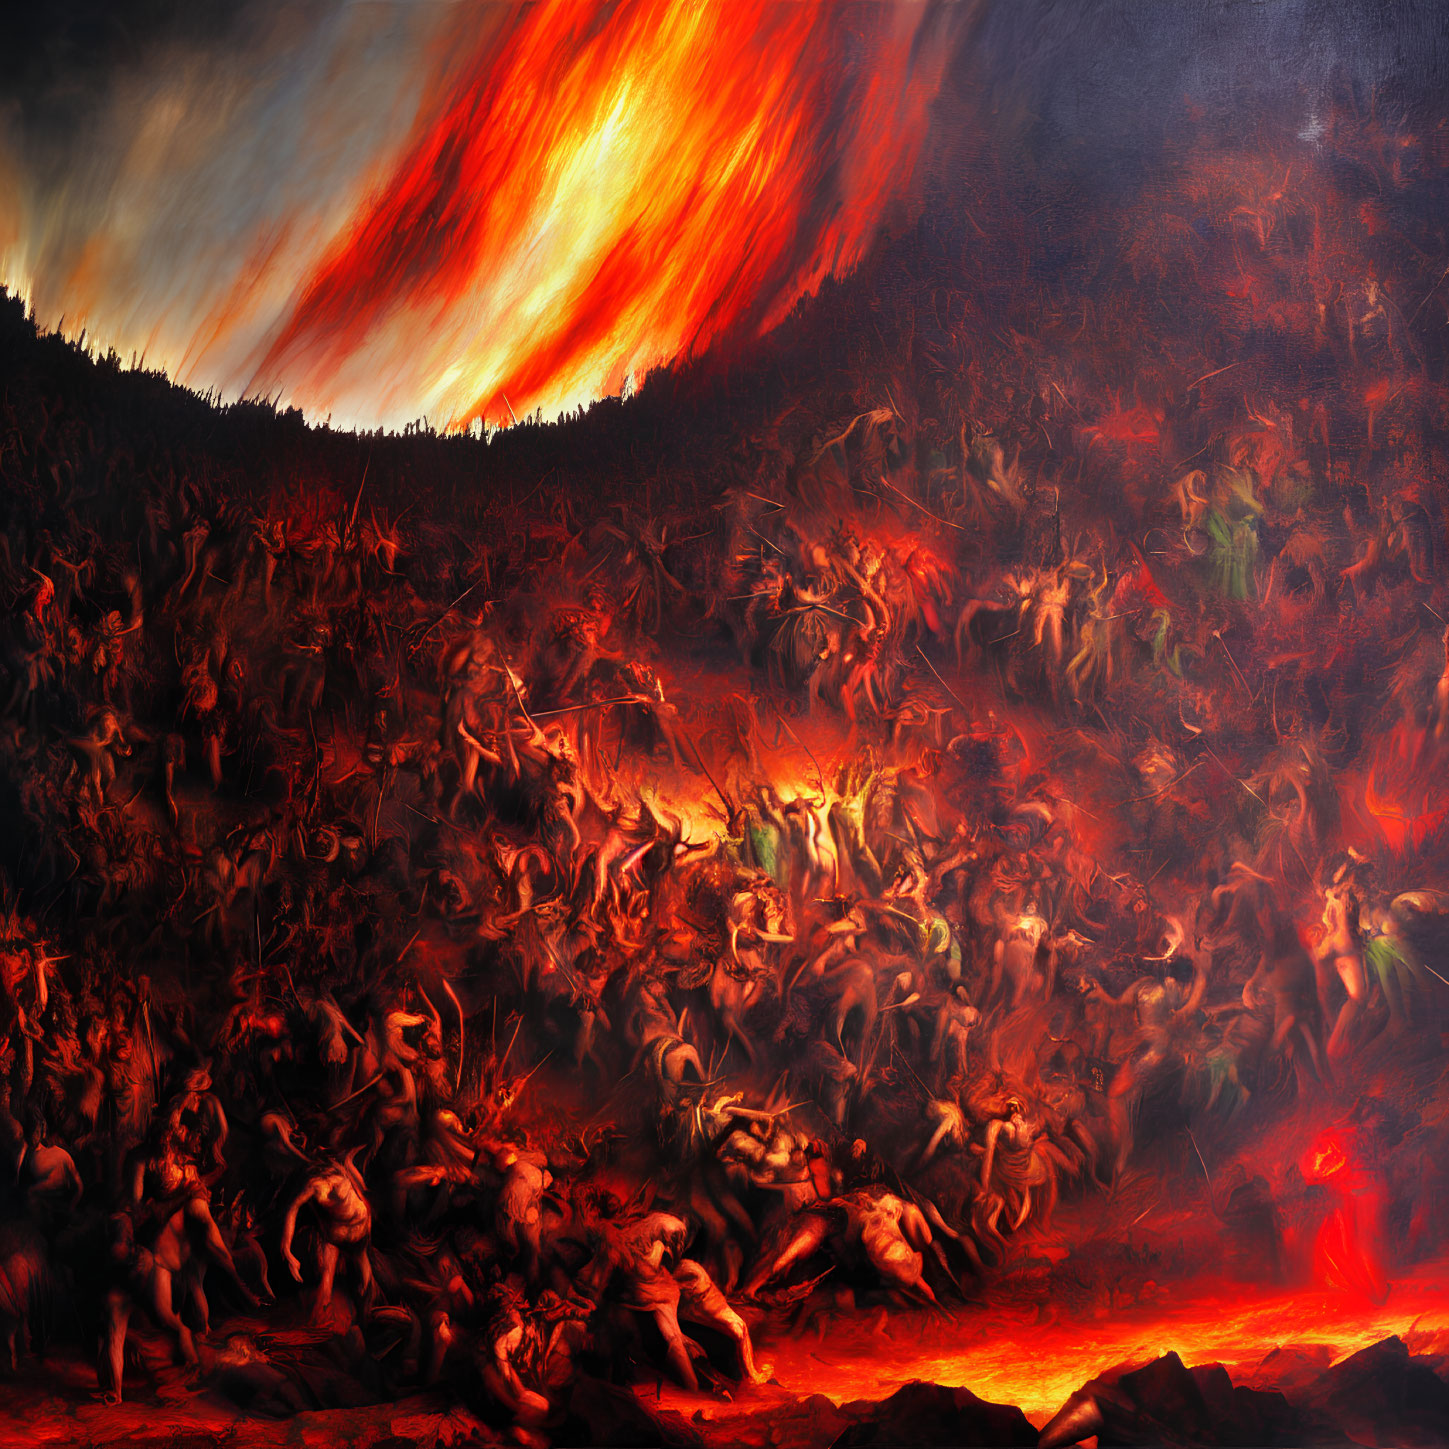 Fiery Hellish Scene with Tormented Figures in Flames